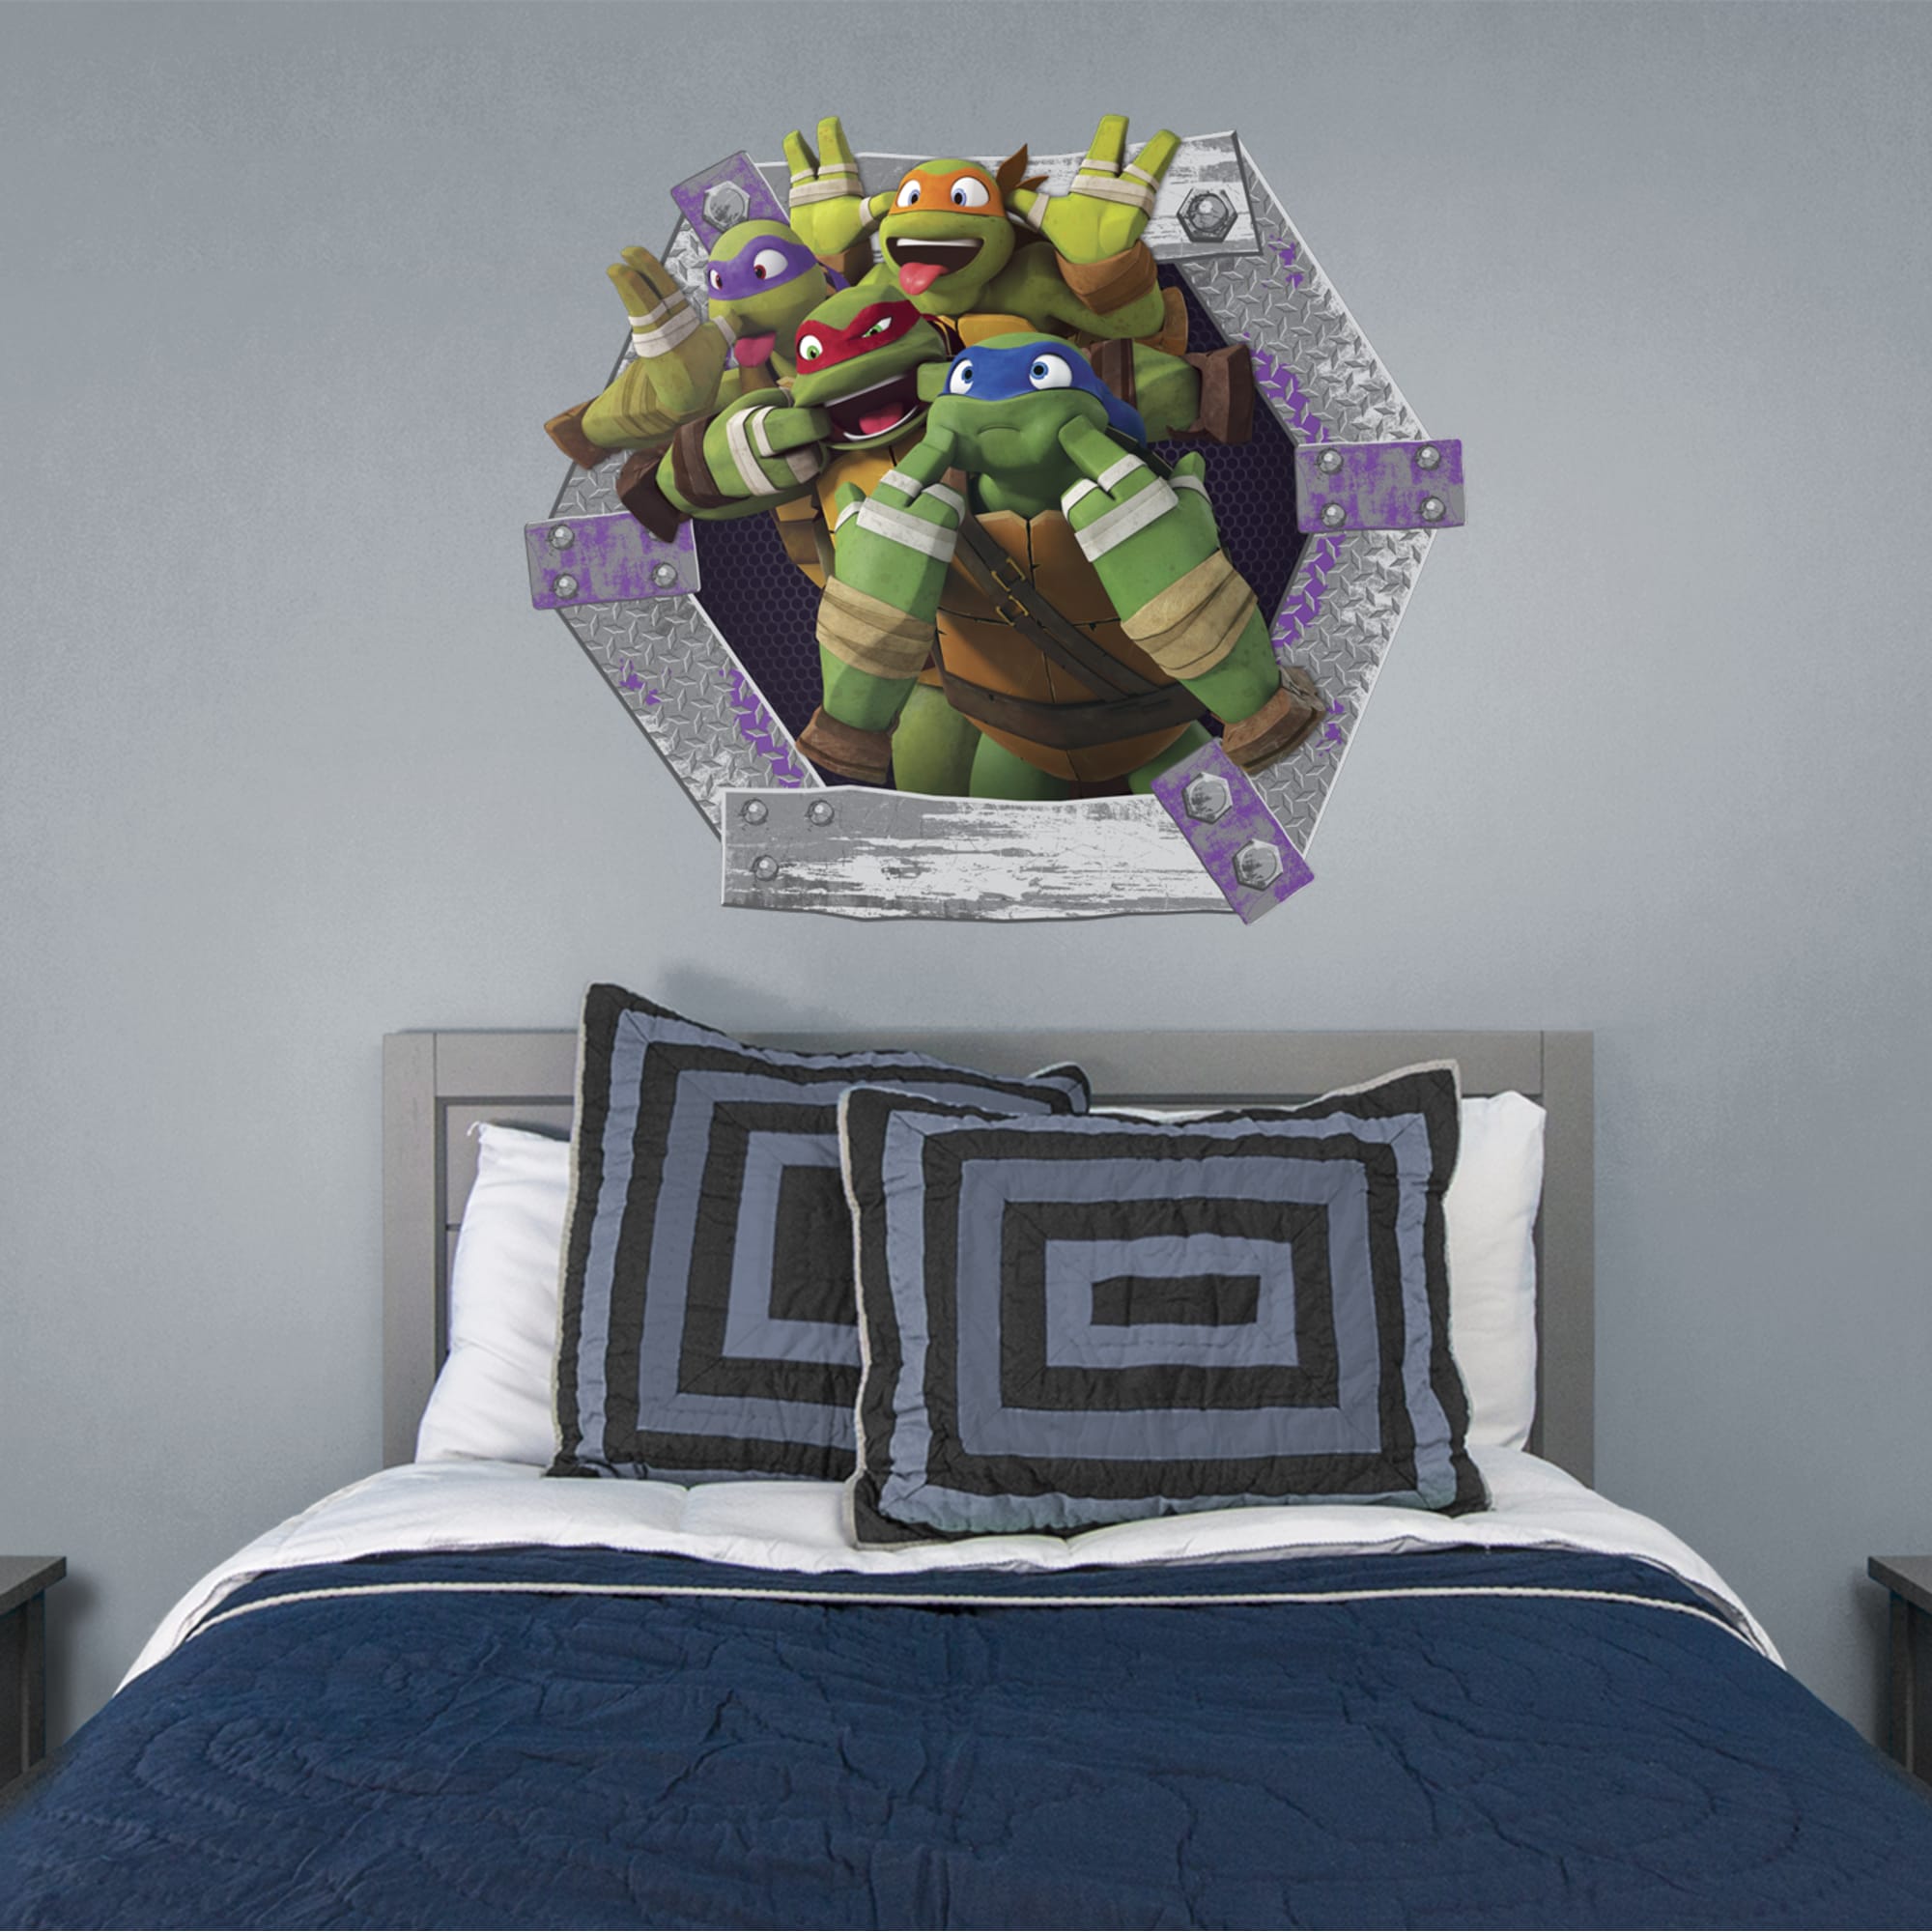 Teenage Mutant Ninja Turtles: Goofy Faces Collection - Officially Licensed Removable Wall Decal 45.0"W x 38.0"H by Fathead | Vin